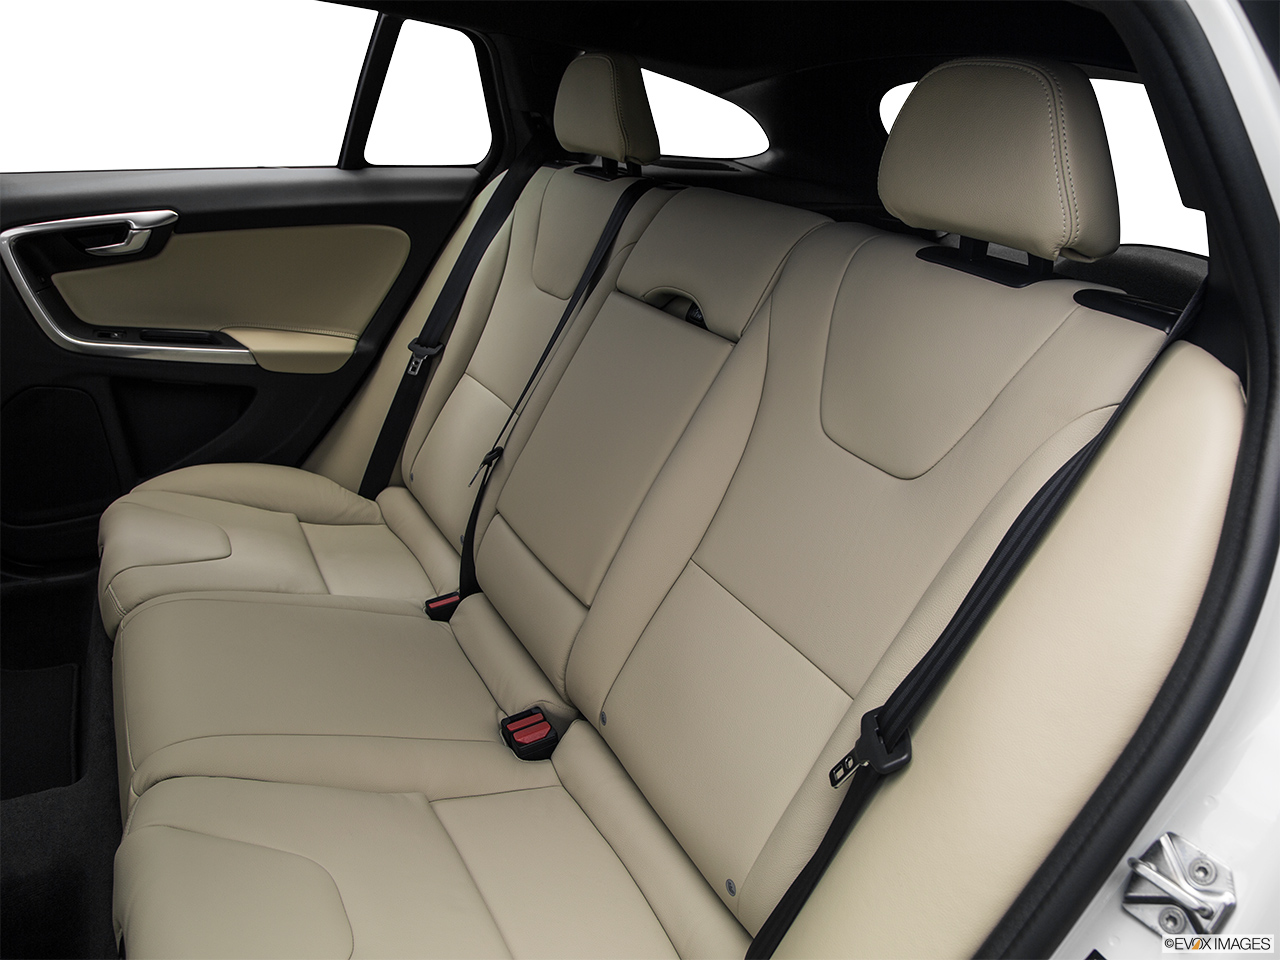 2017 Volvo V60 T5 Premier Rear seats from Drivers Side. 